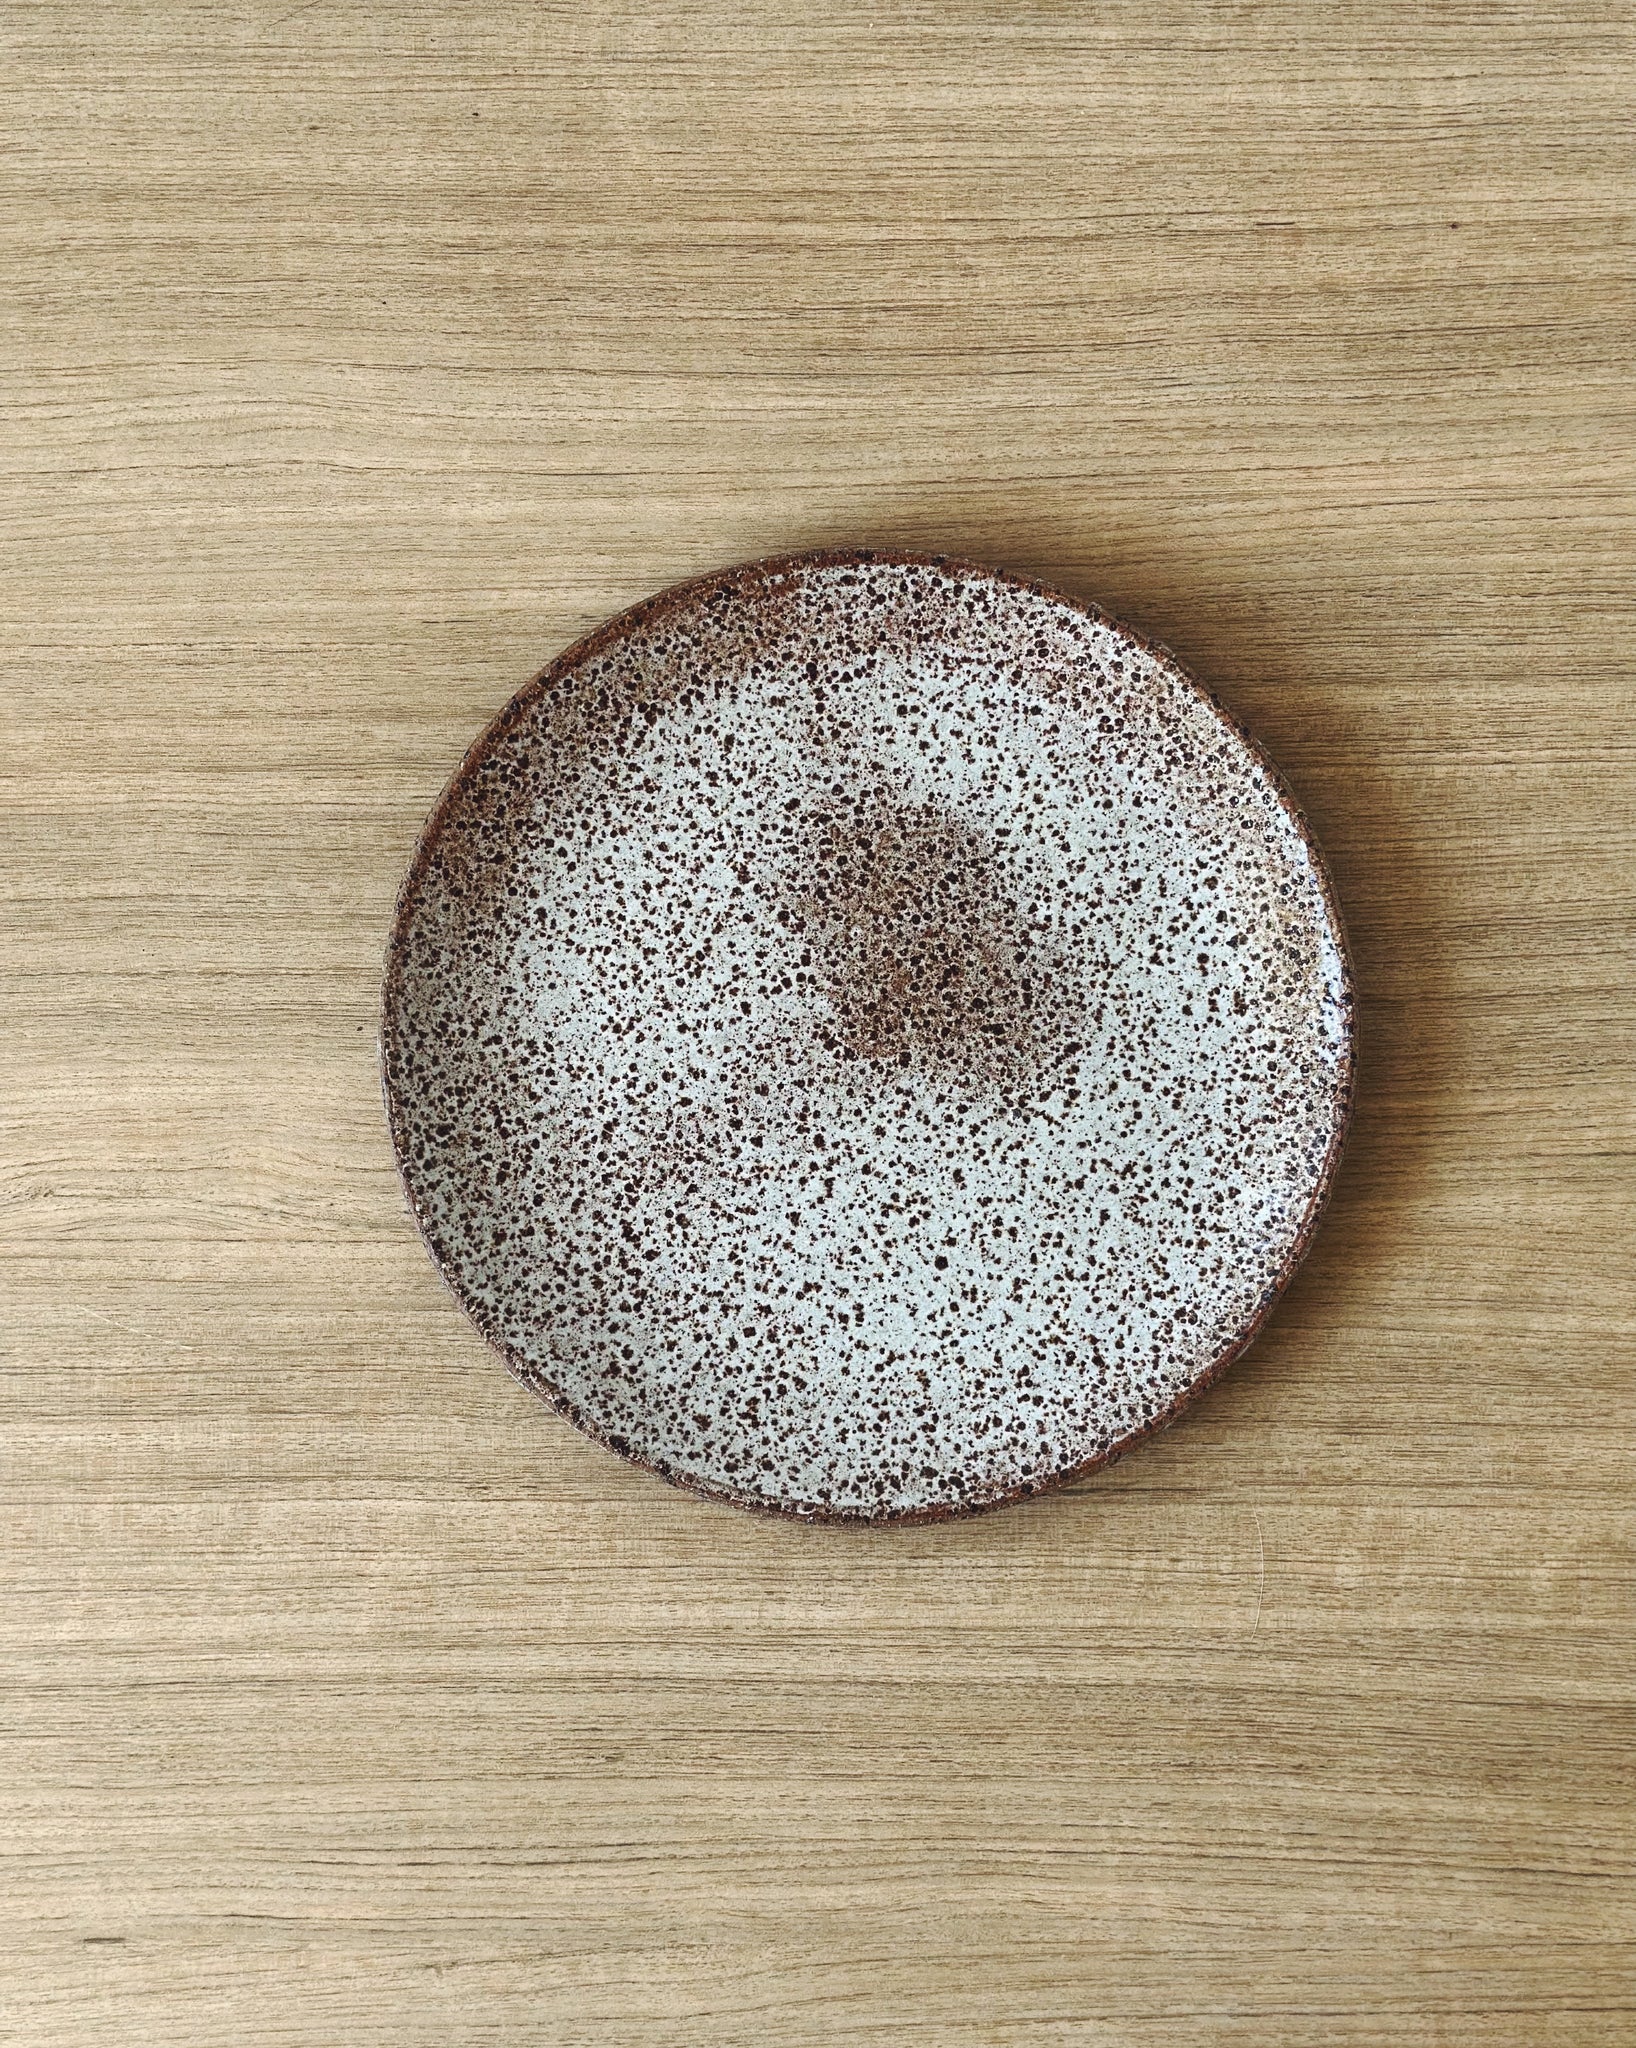 speckled plates